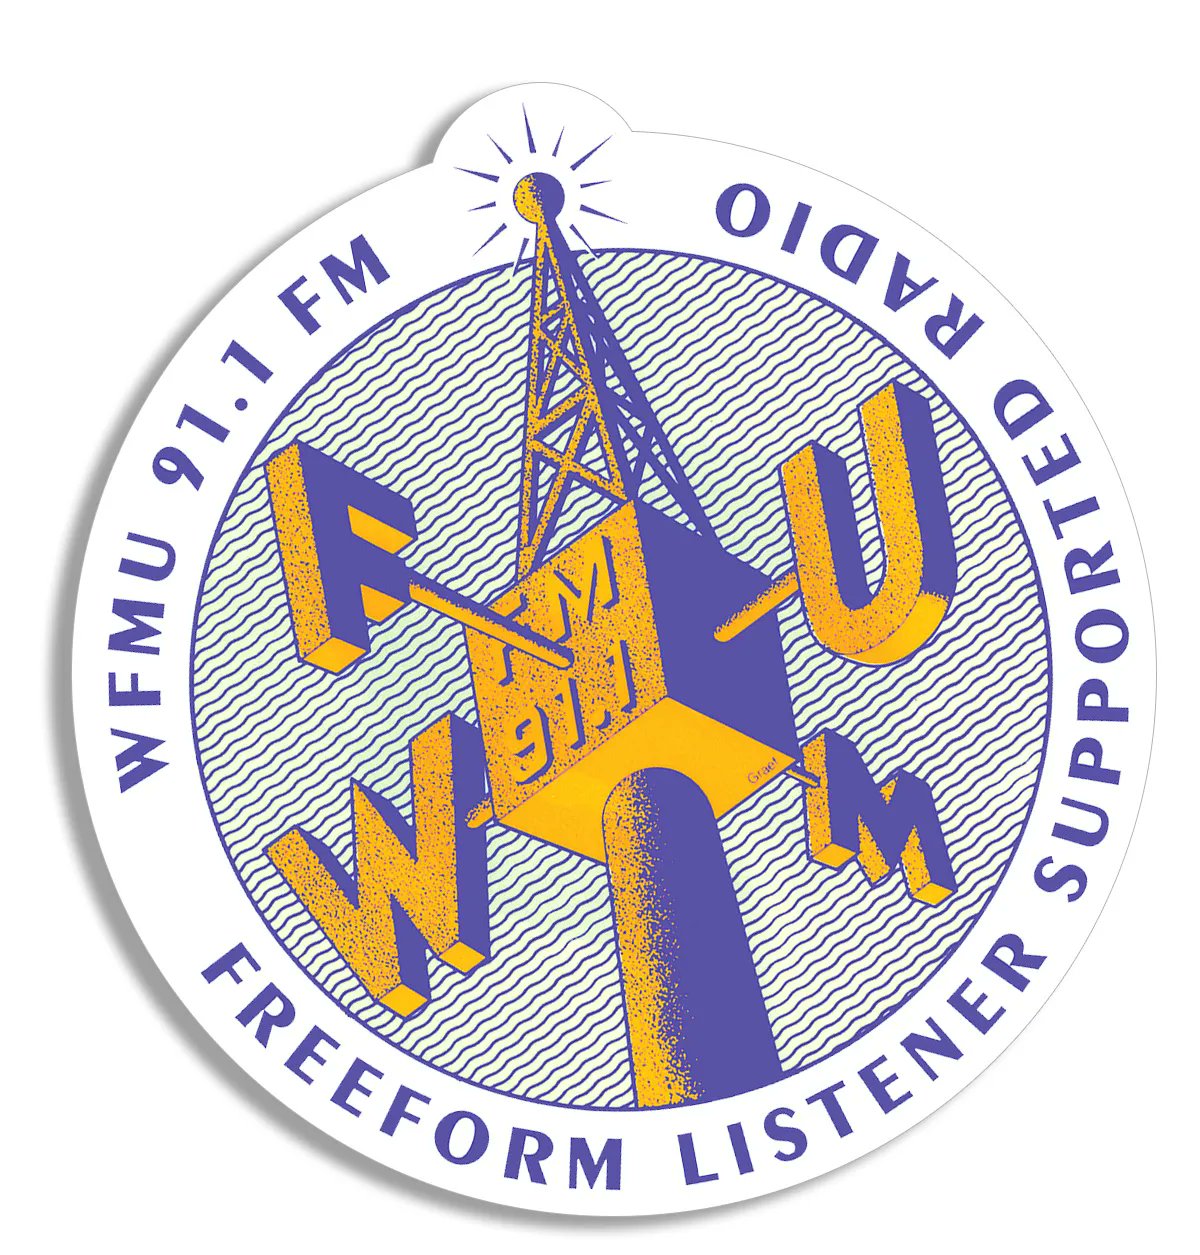 WFMU: music radio without frontiers, Radio